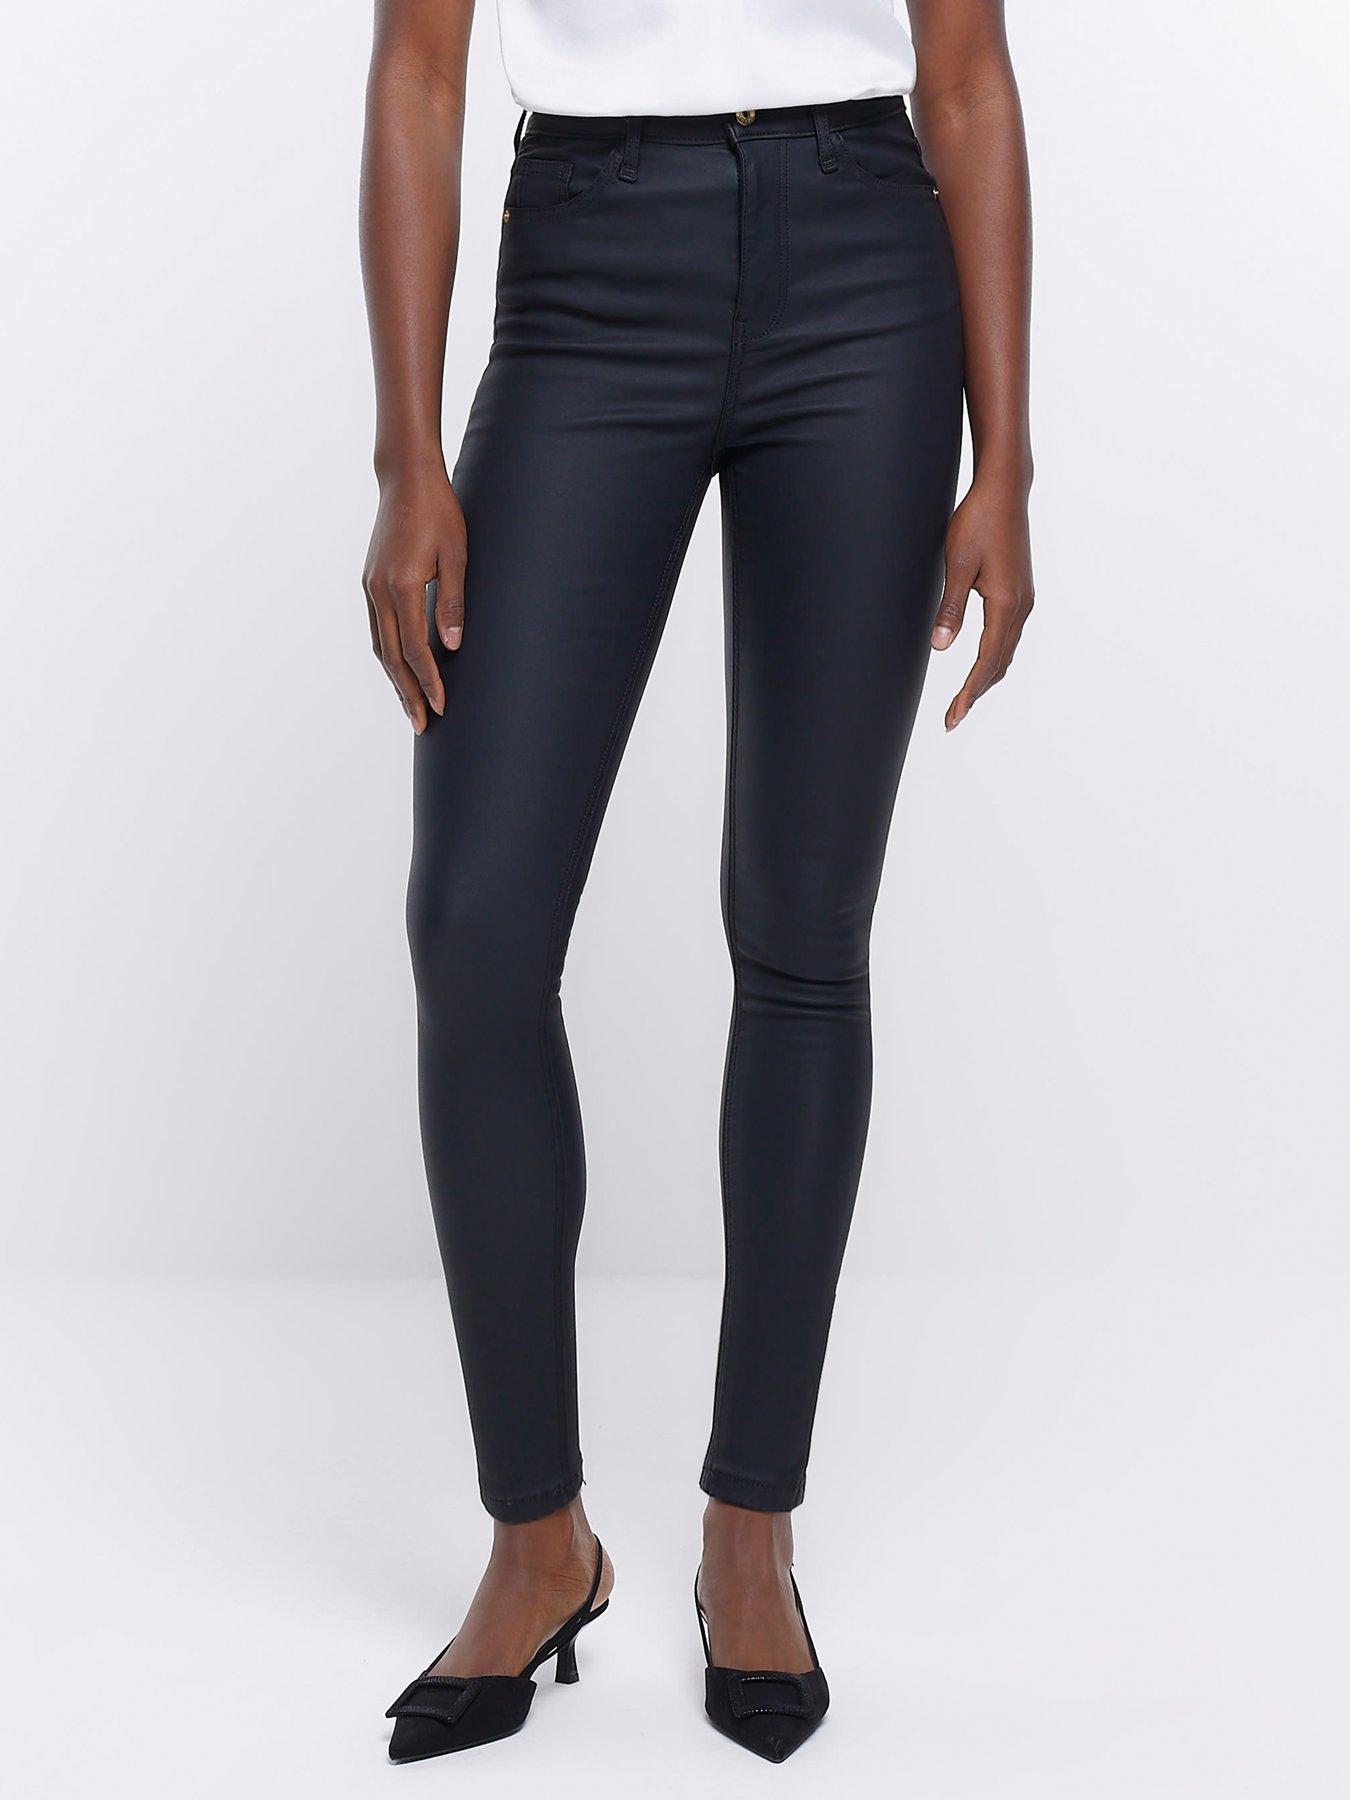 Buy Yours Curve Black Skinny Stretch AVA Jeans from the Next UK online shop